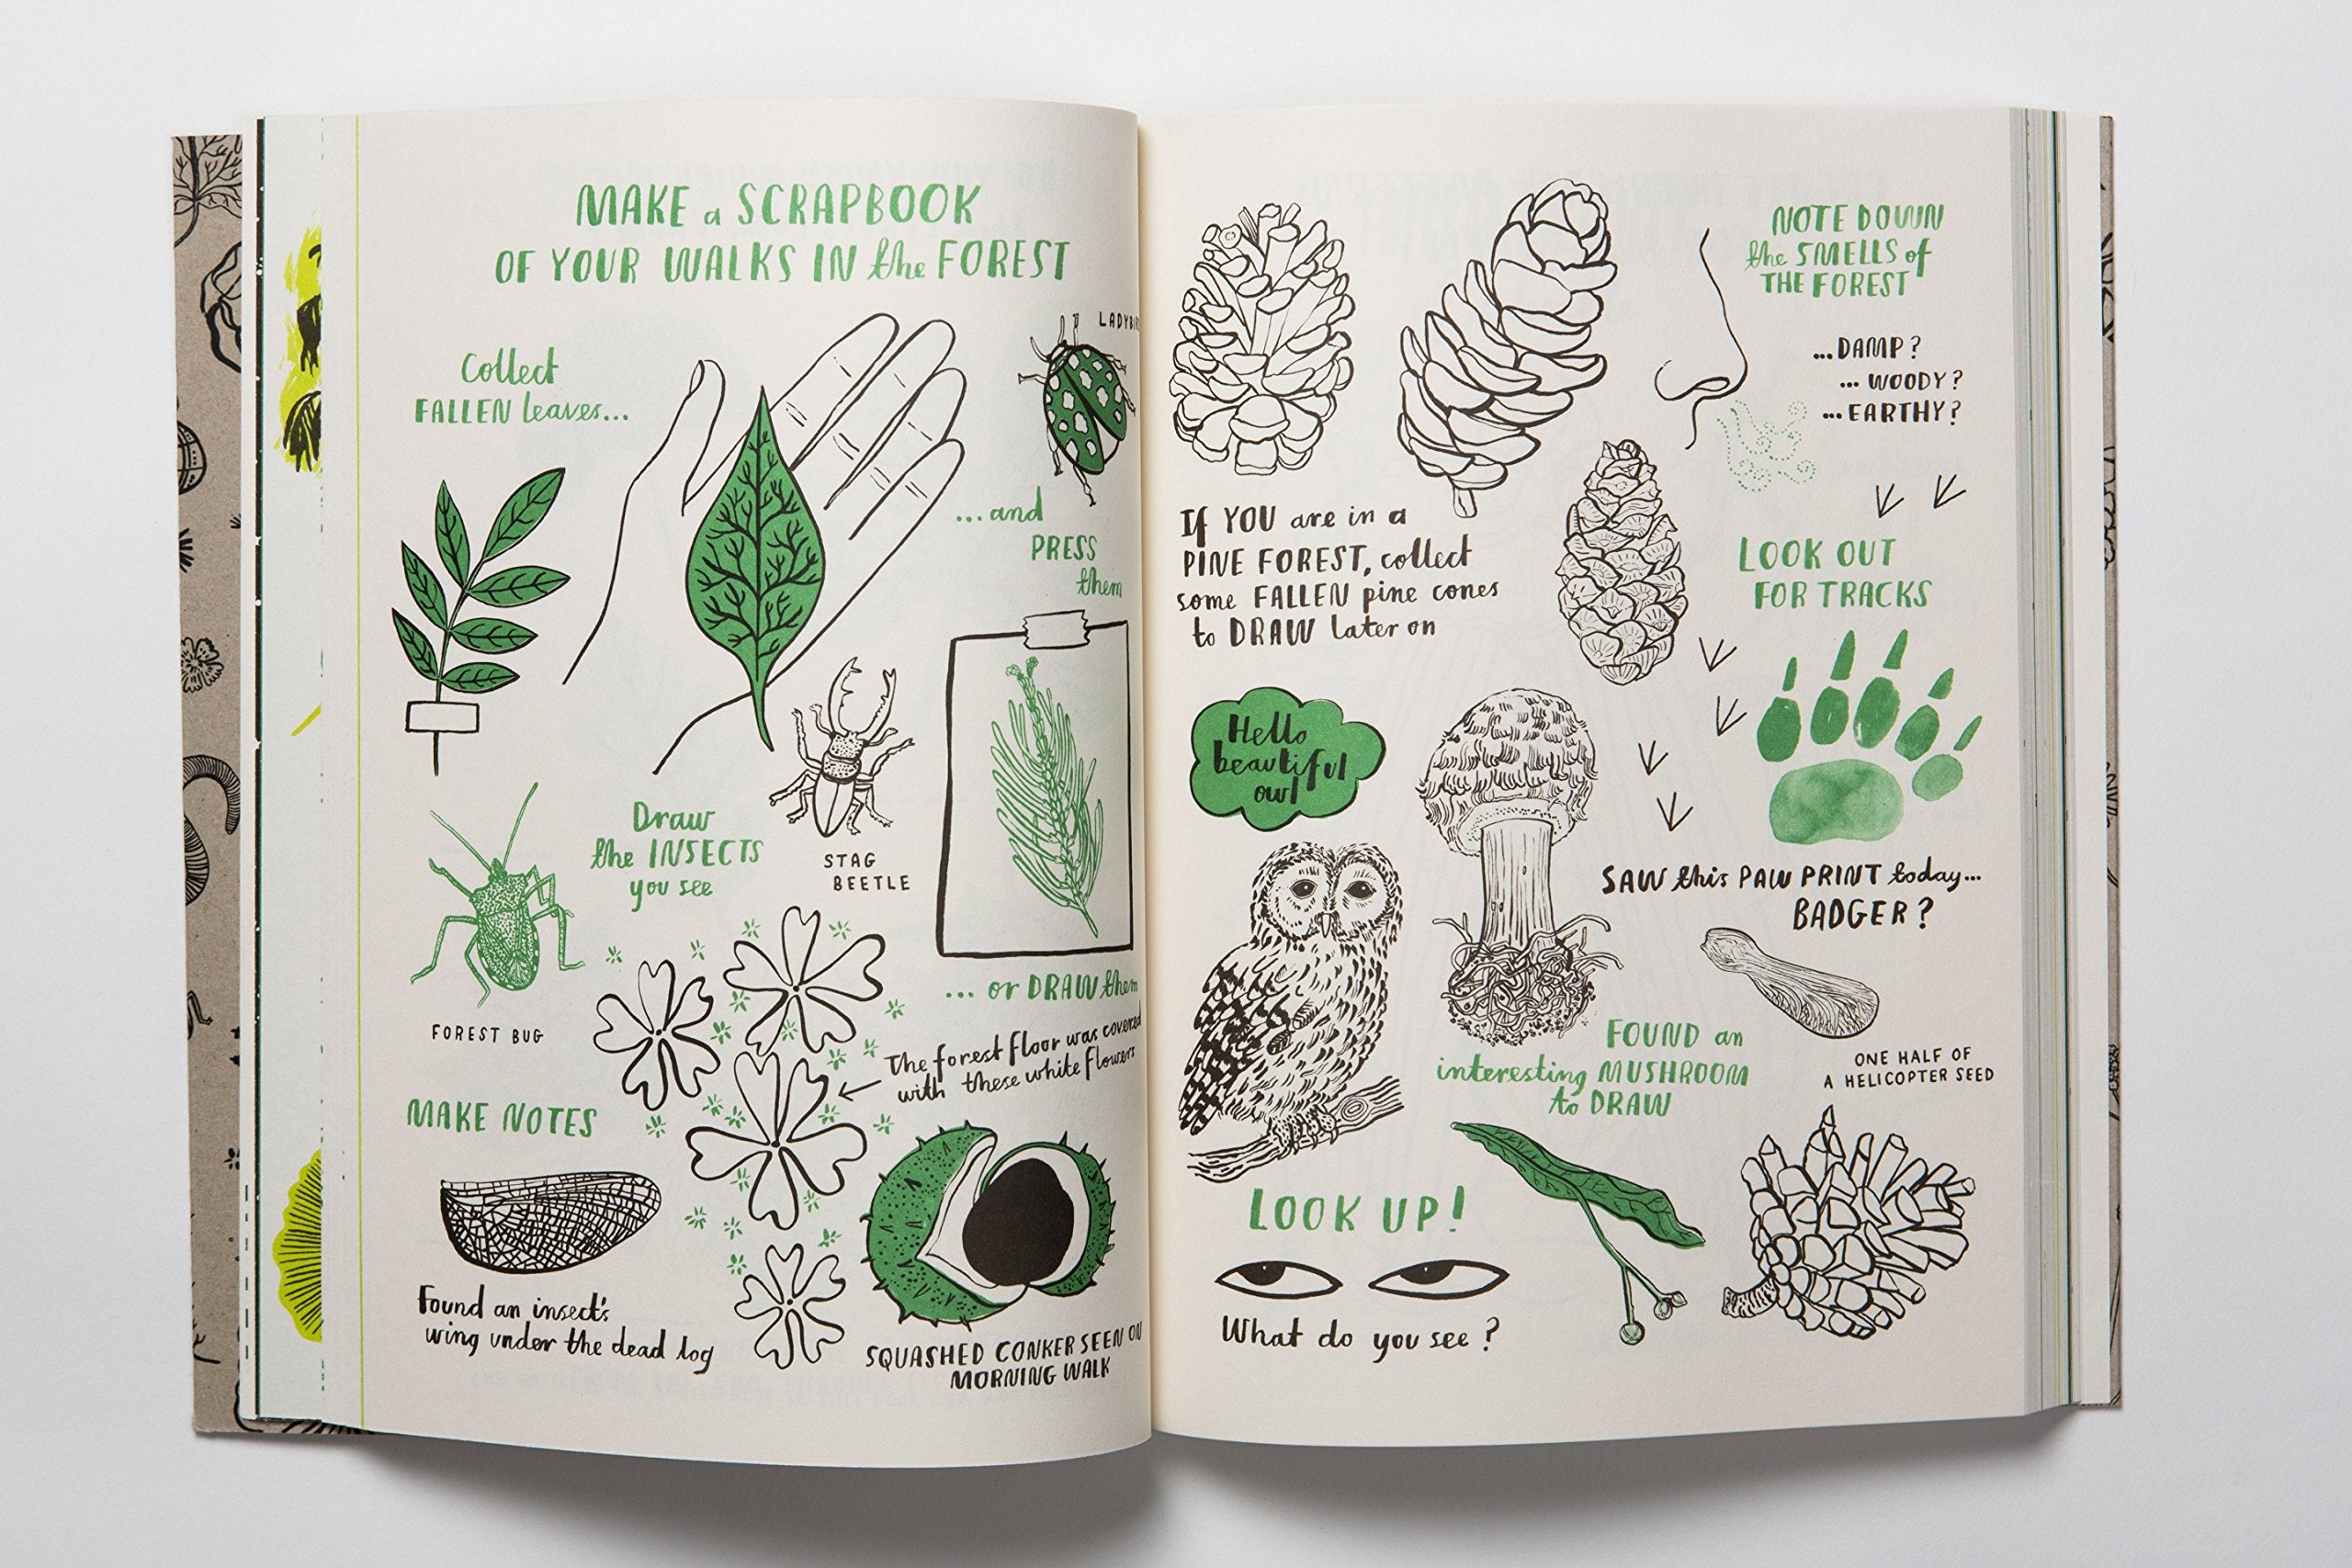 In the Vegetable Garden: My Nature Sticker Activity Book - Science